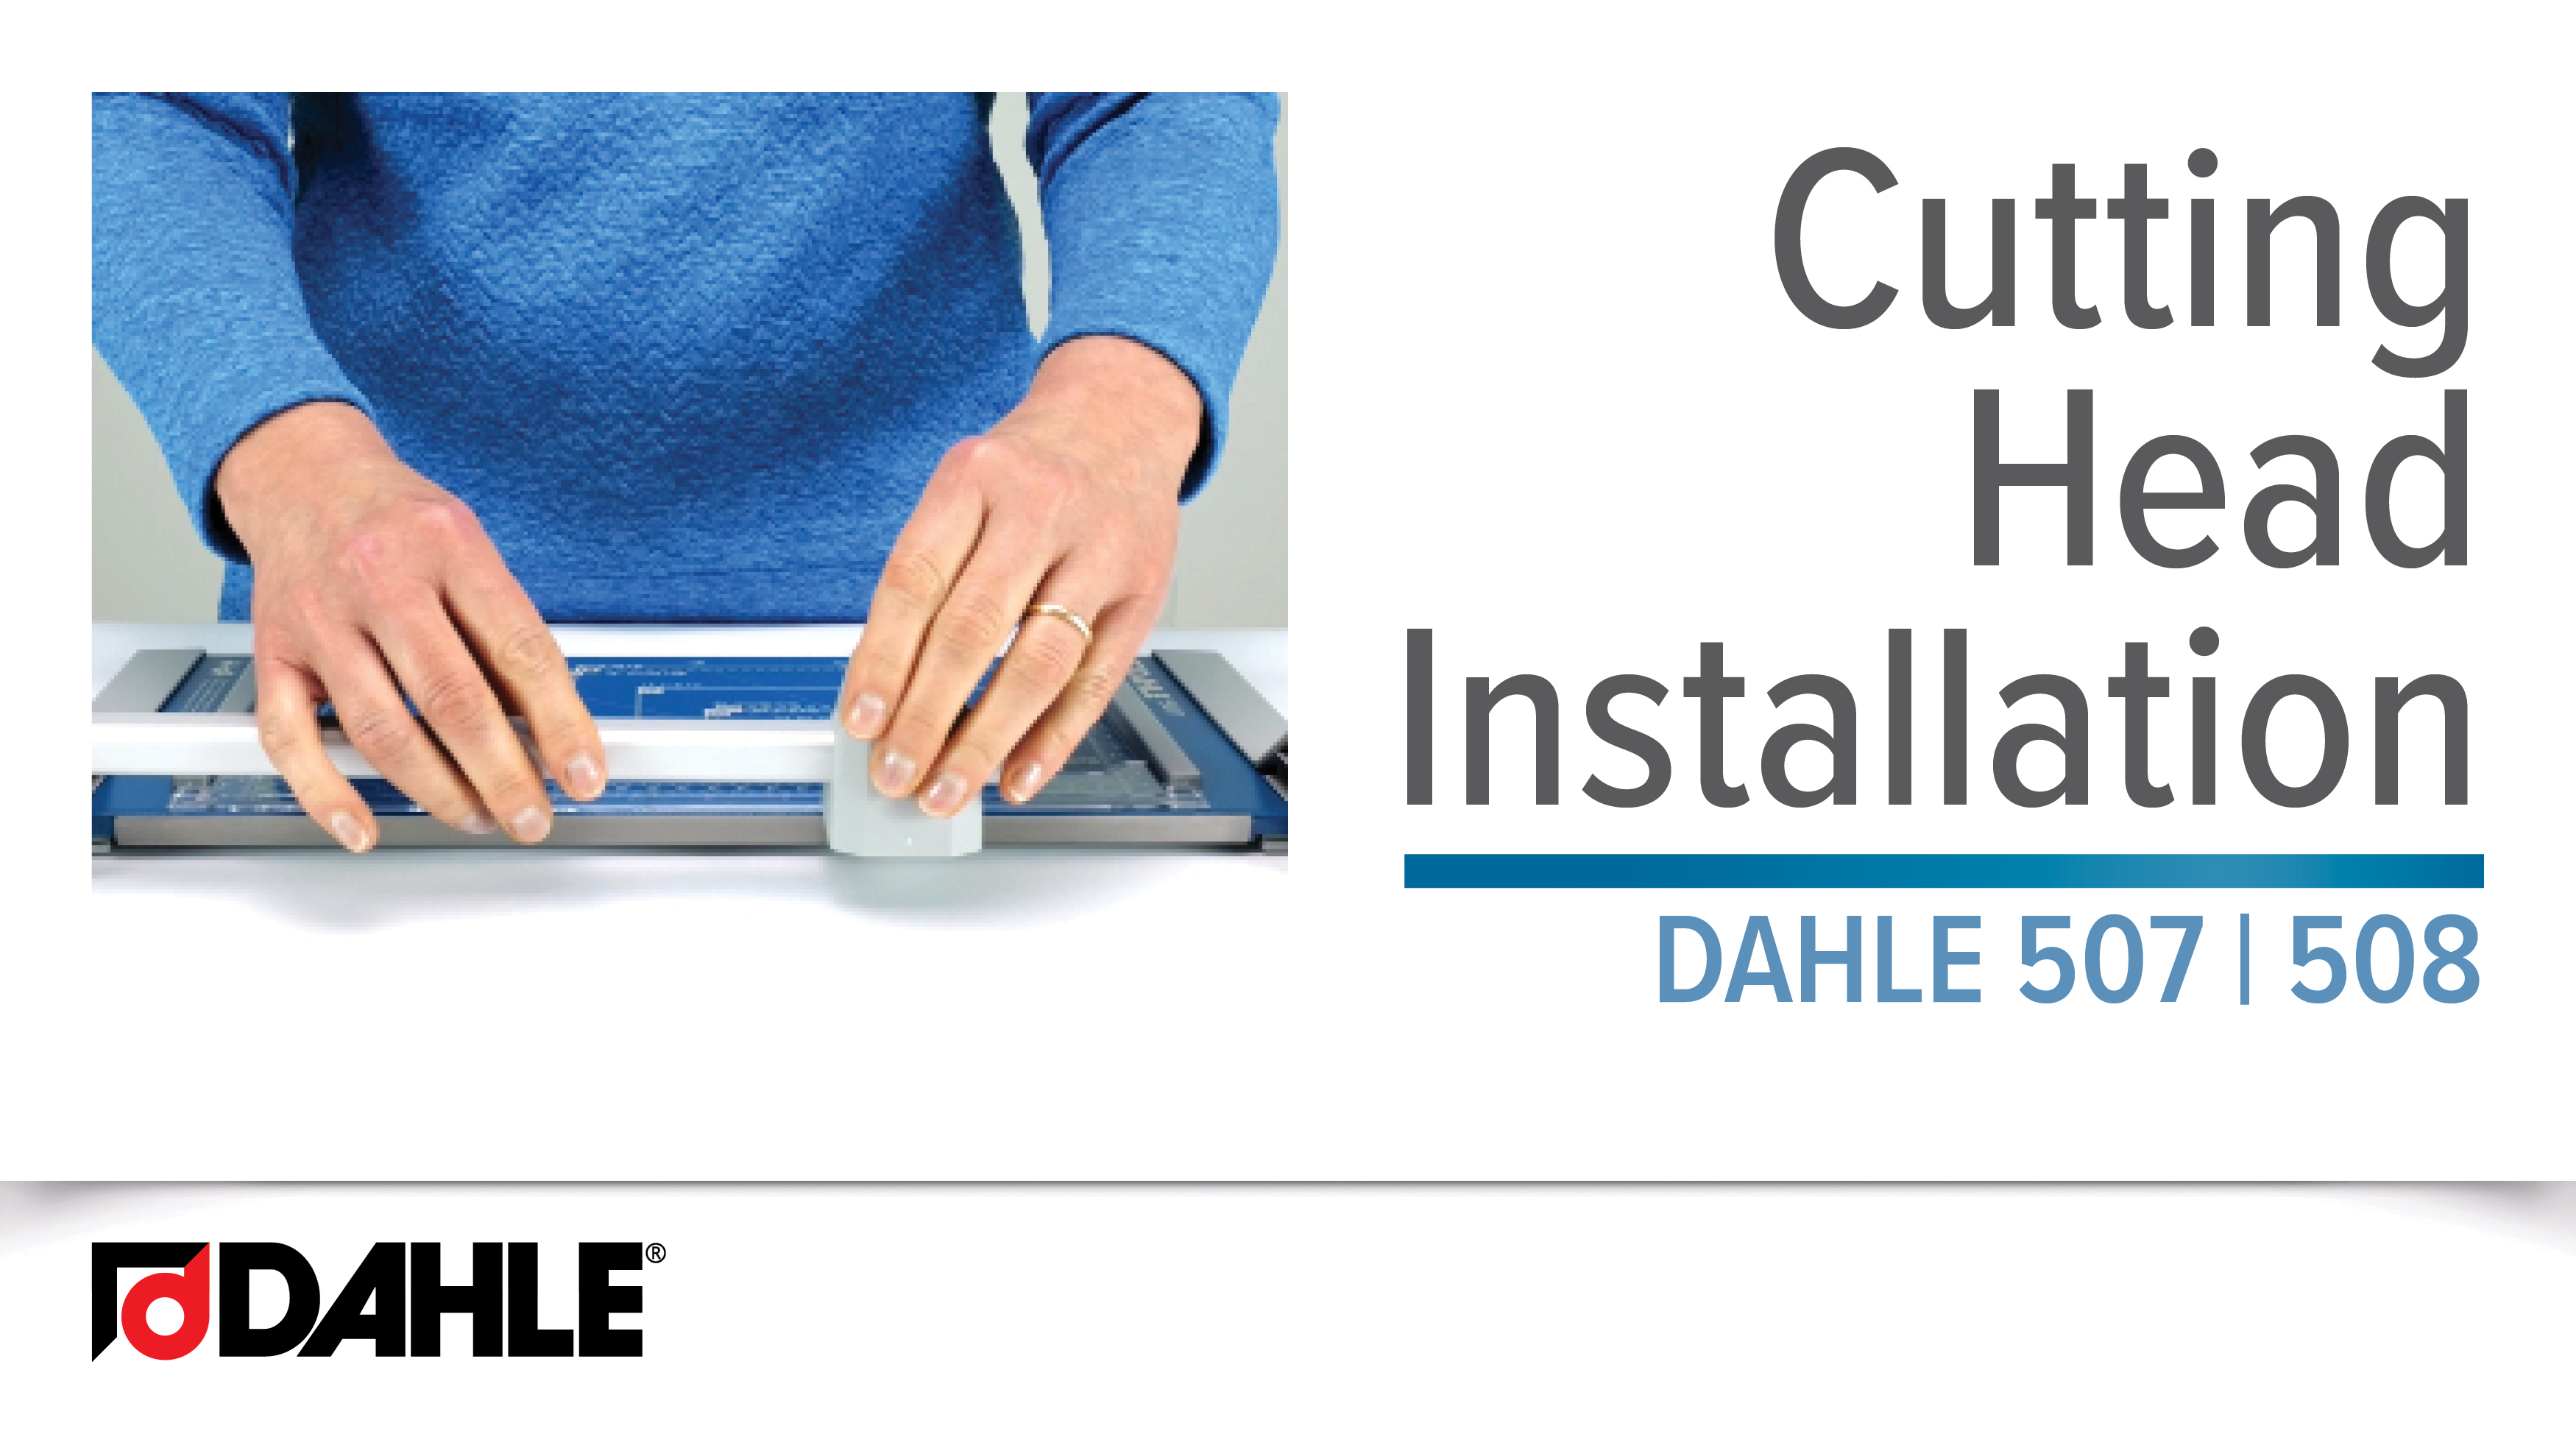 <big><strong>Dahle 507 | 508</strong></big>
<br>Personal Series